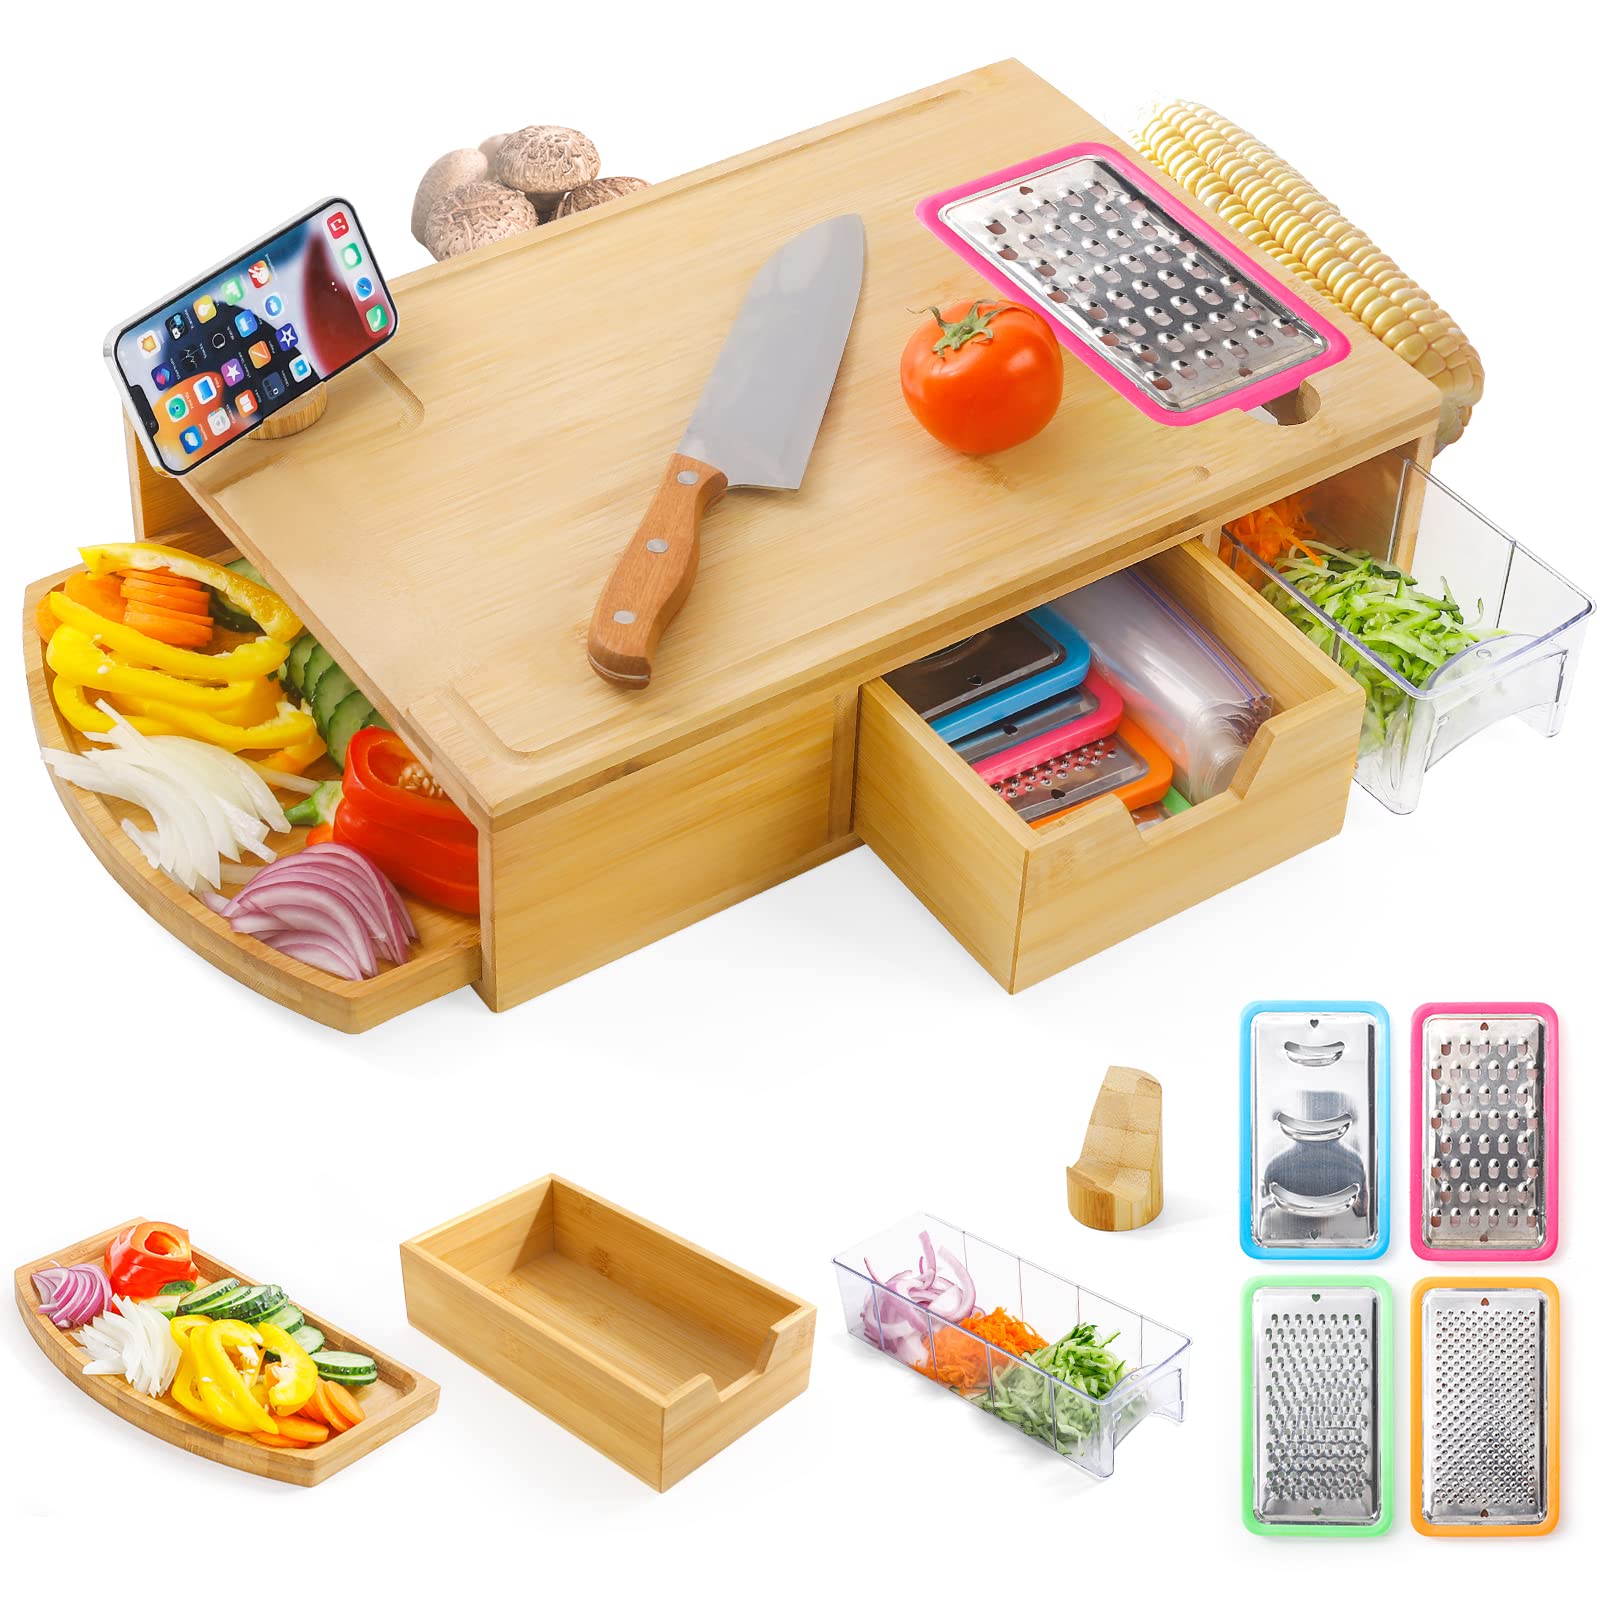 Shangrun Bamboo Cutting Board With 2 Containers, Tray And 4 Graders